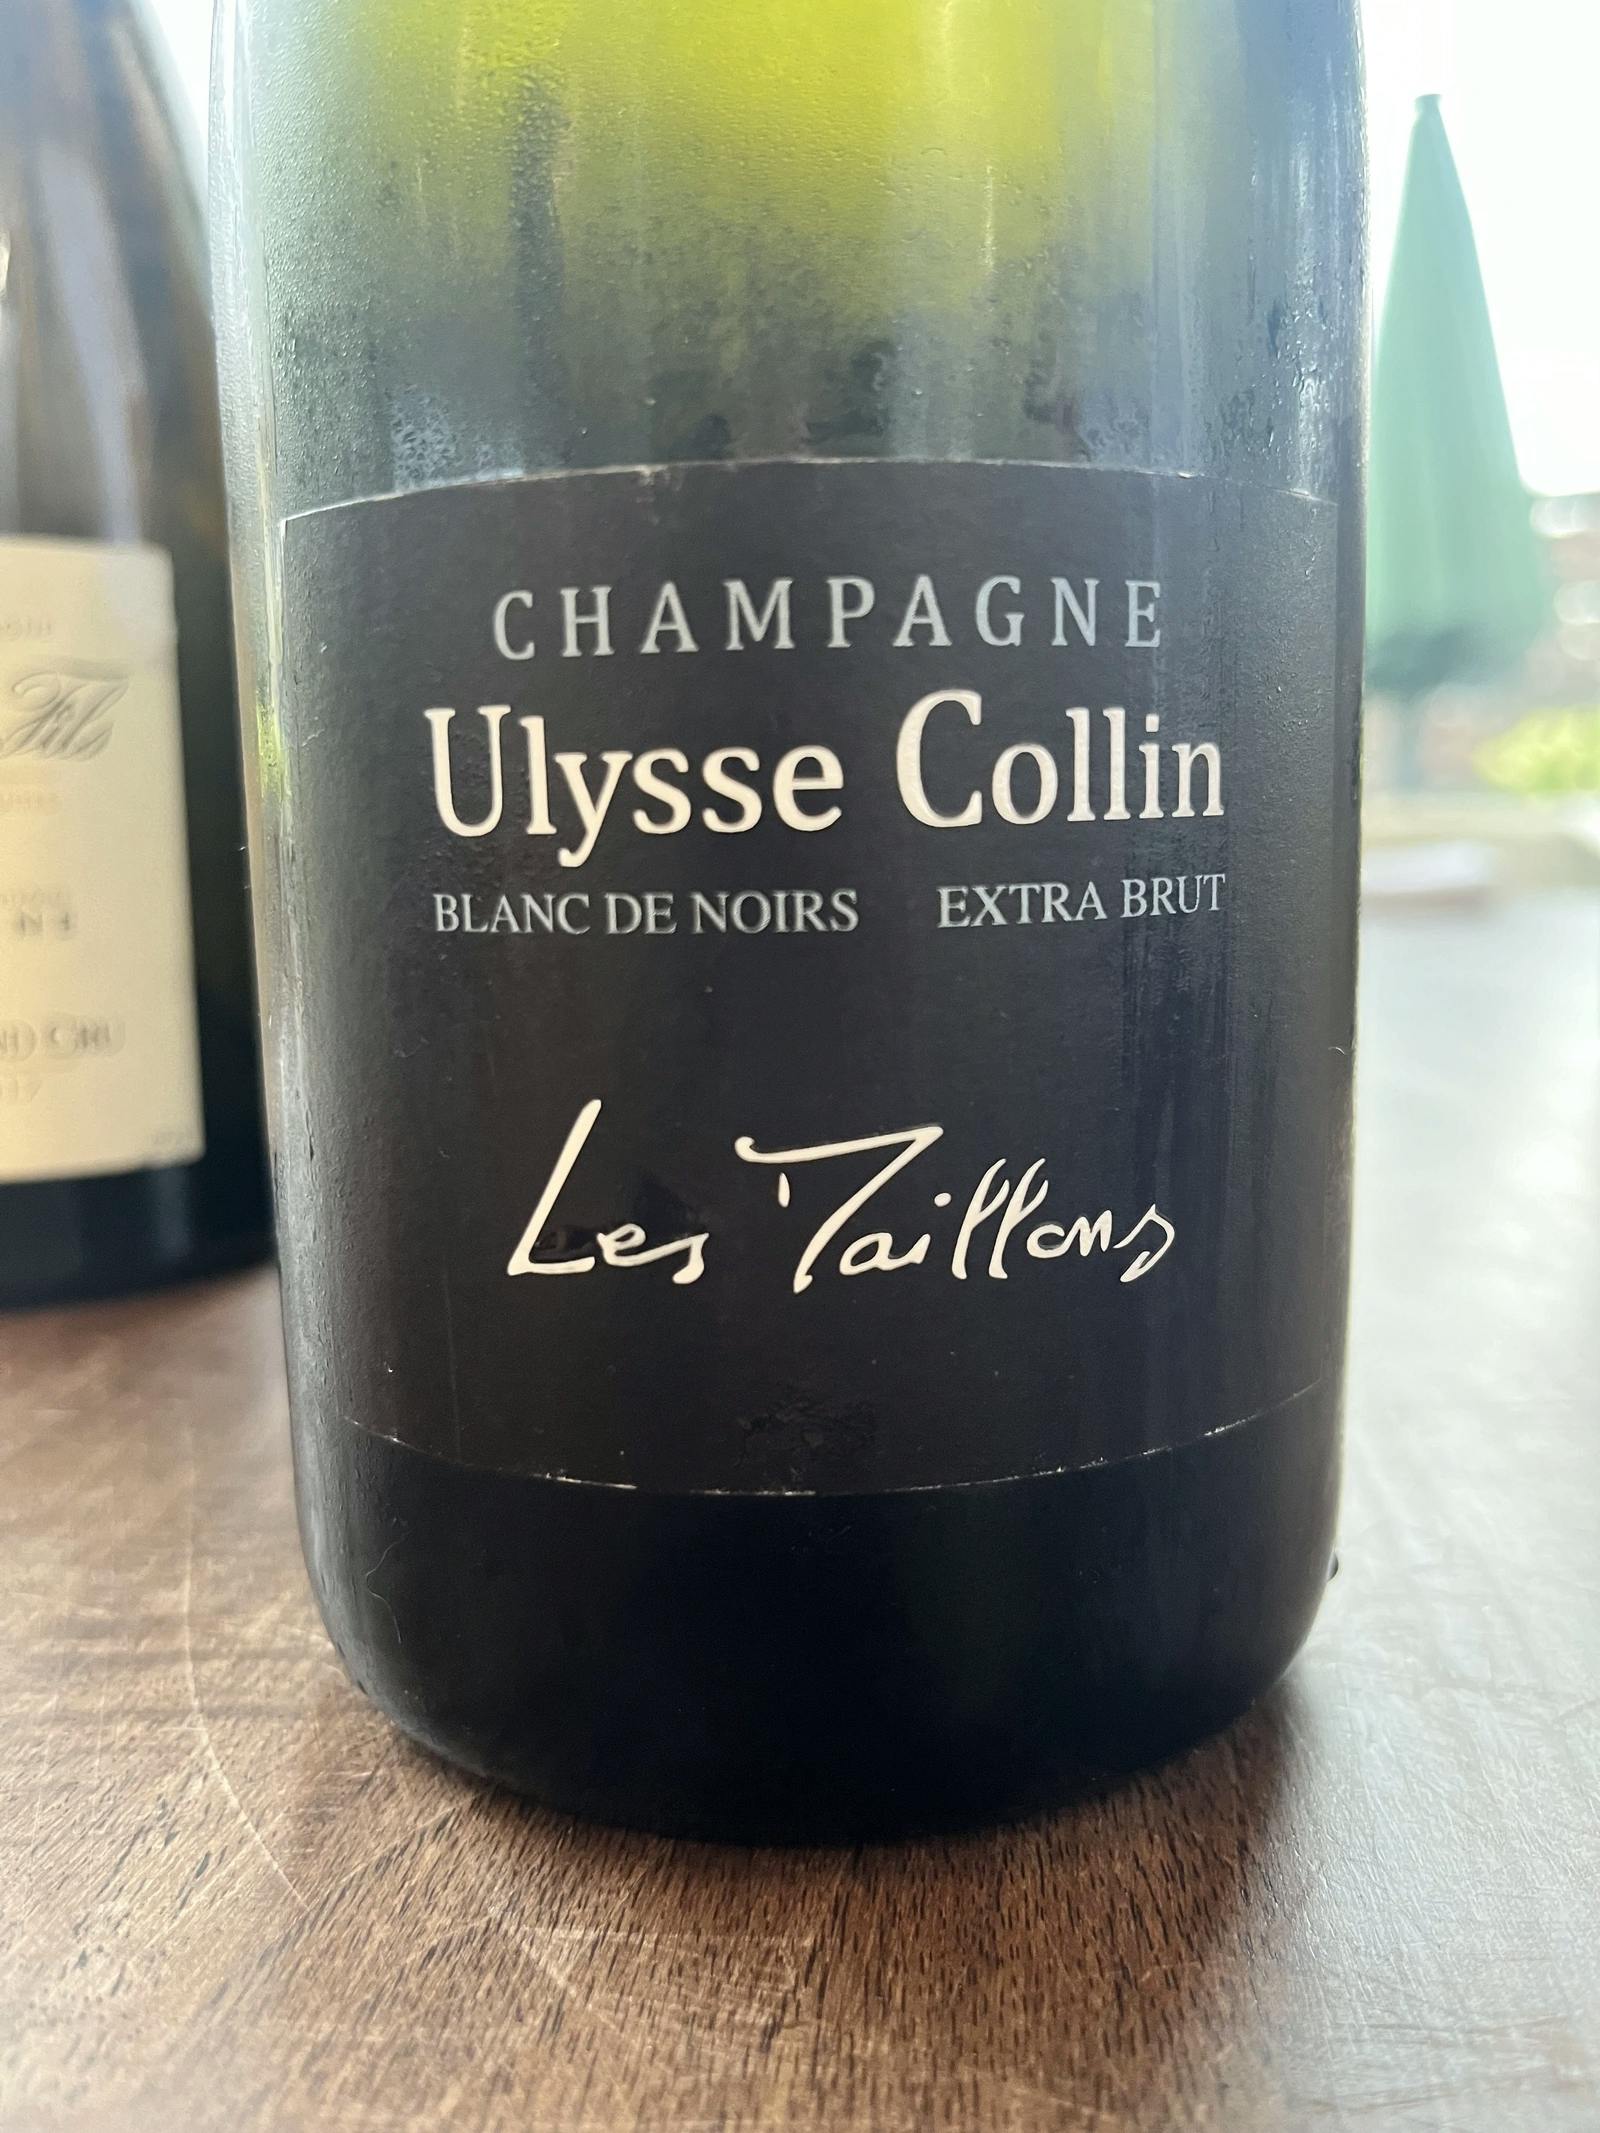 Ulysse Collin Les Maillons (2017) NV